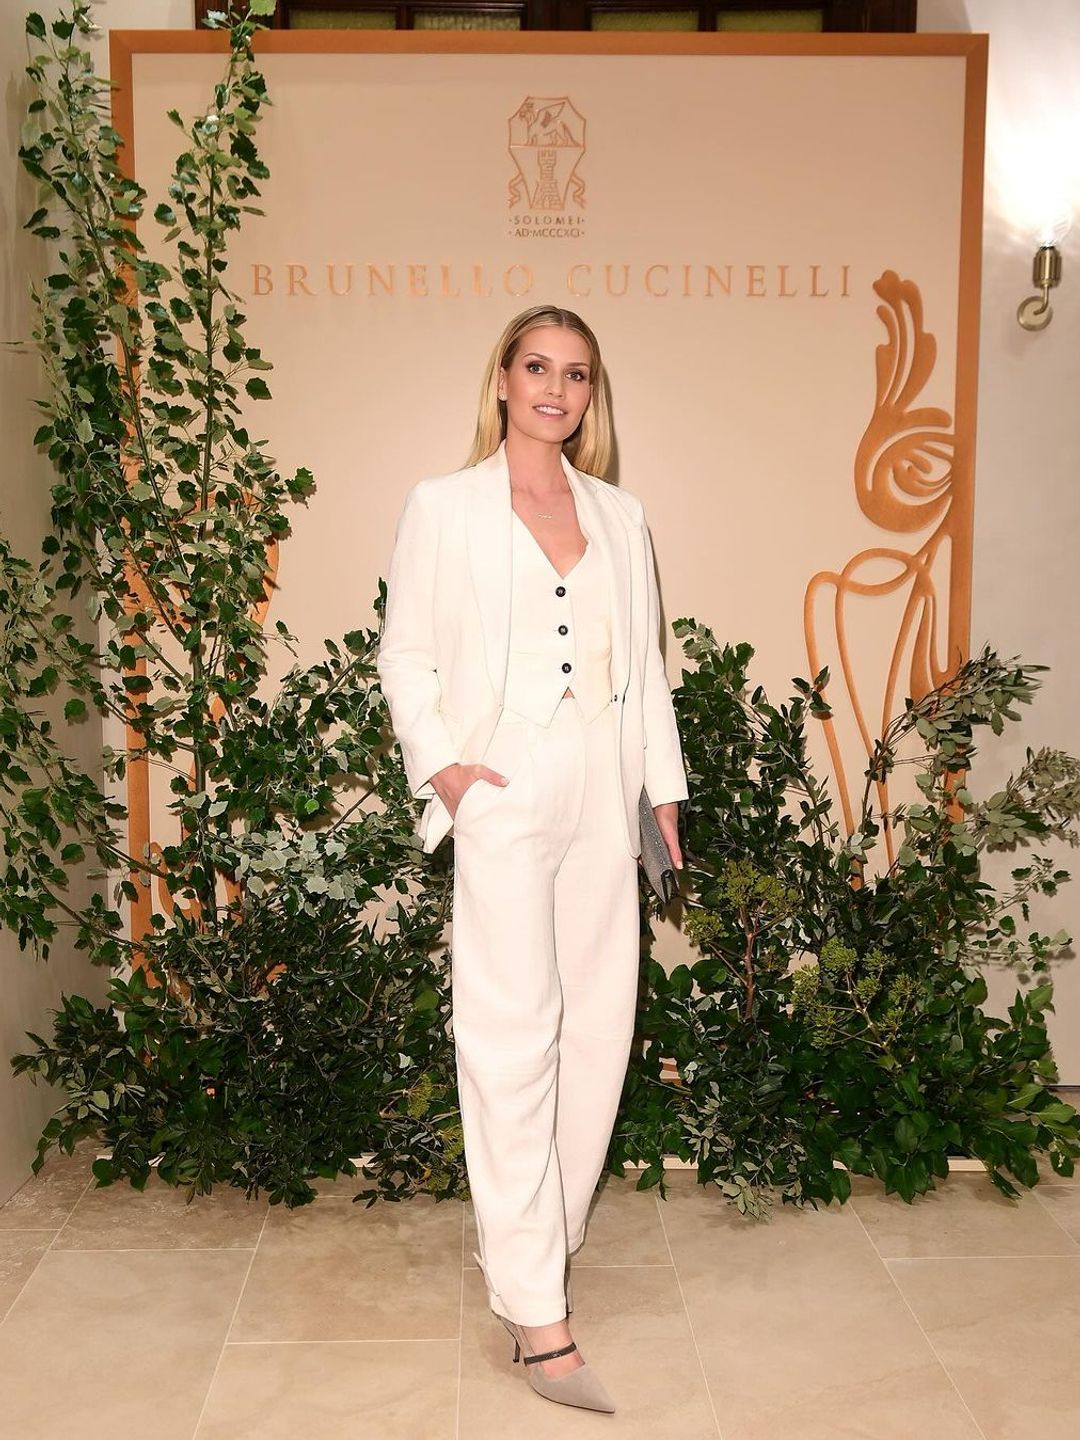 Lady Kitty Spencer wearing a three-piece suit by Brunello Cucinelli 